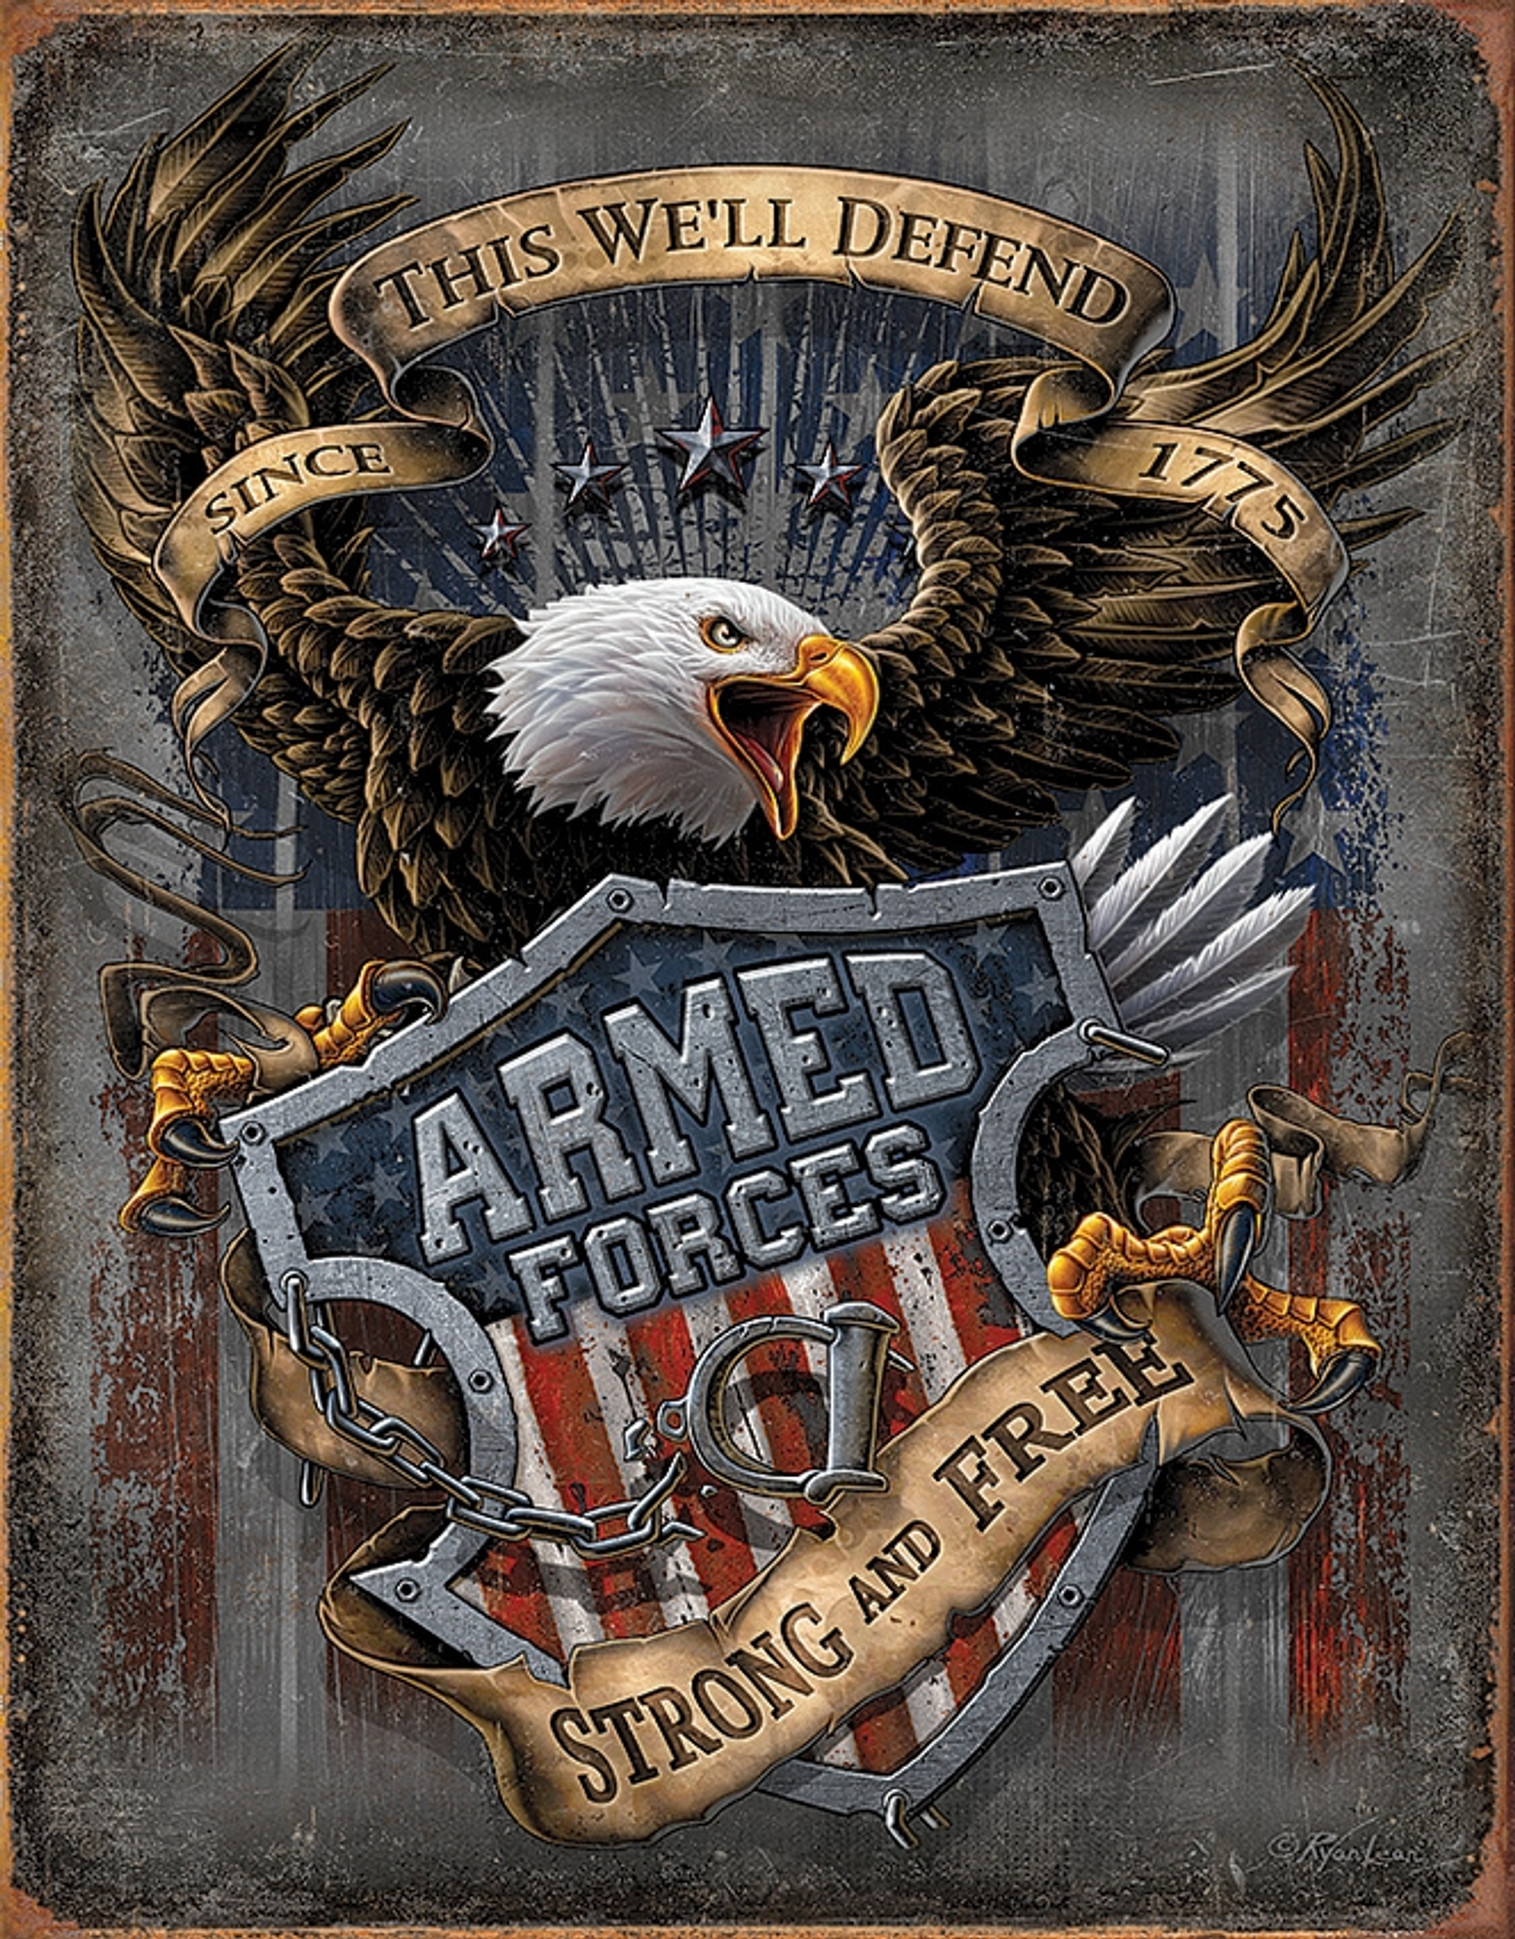 Armed Forces Since 1775